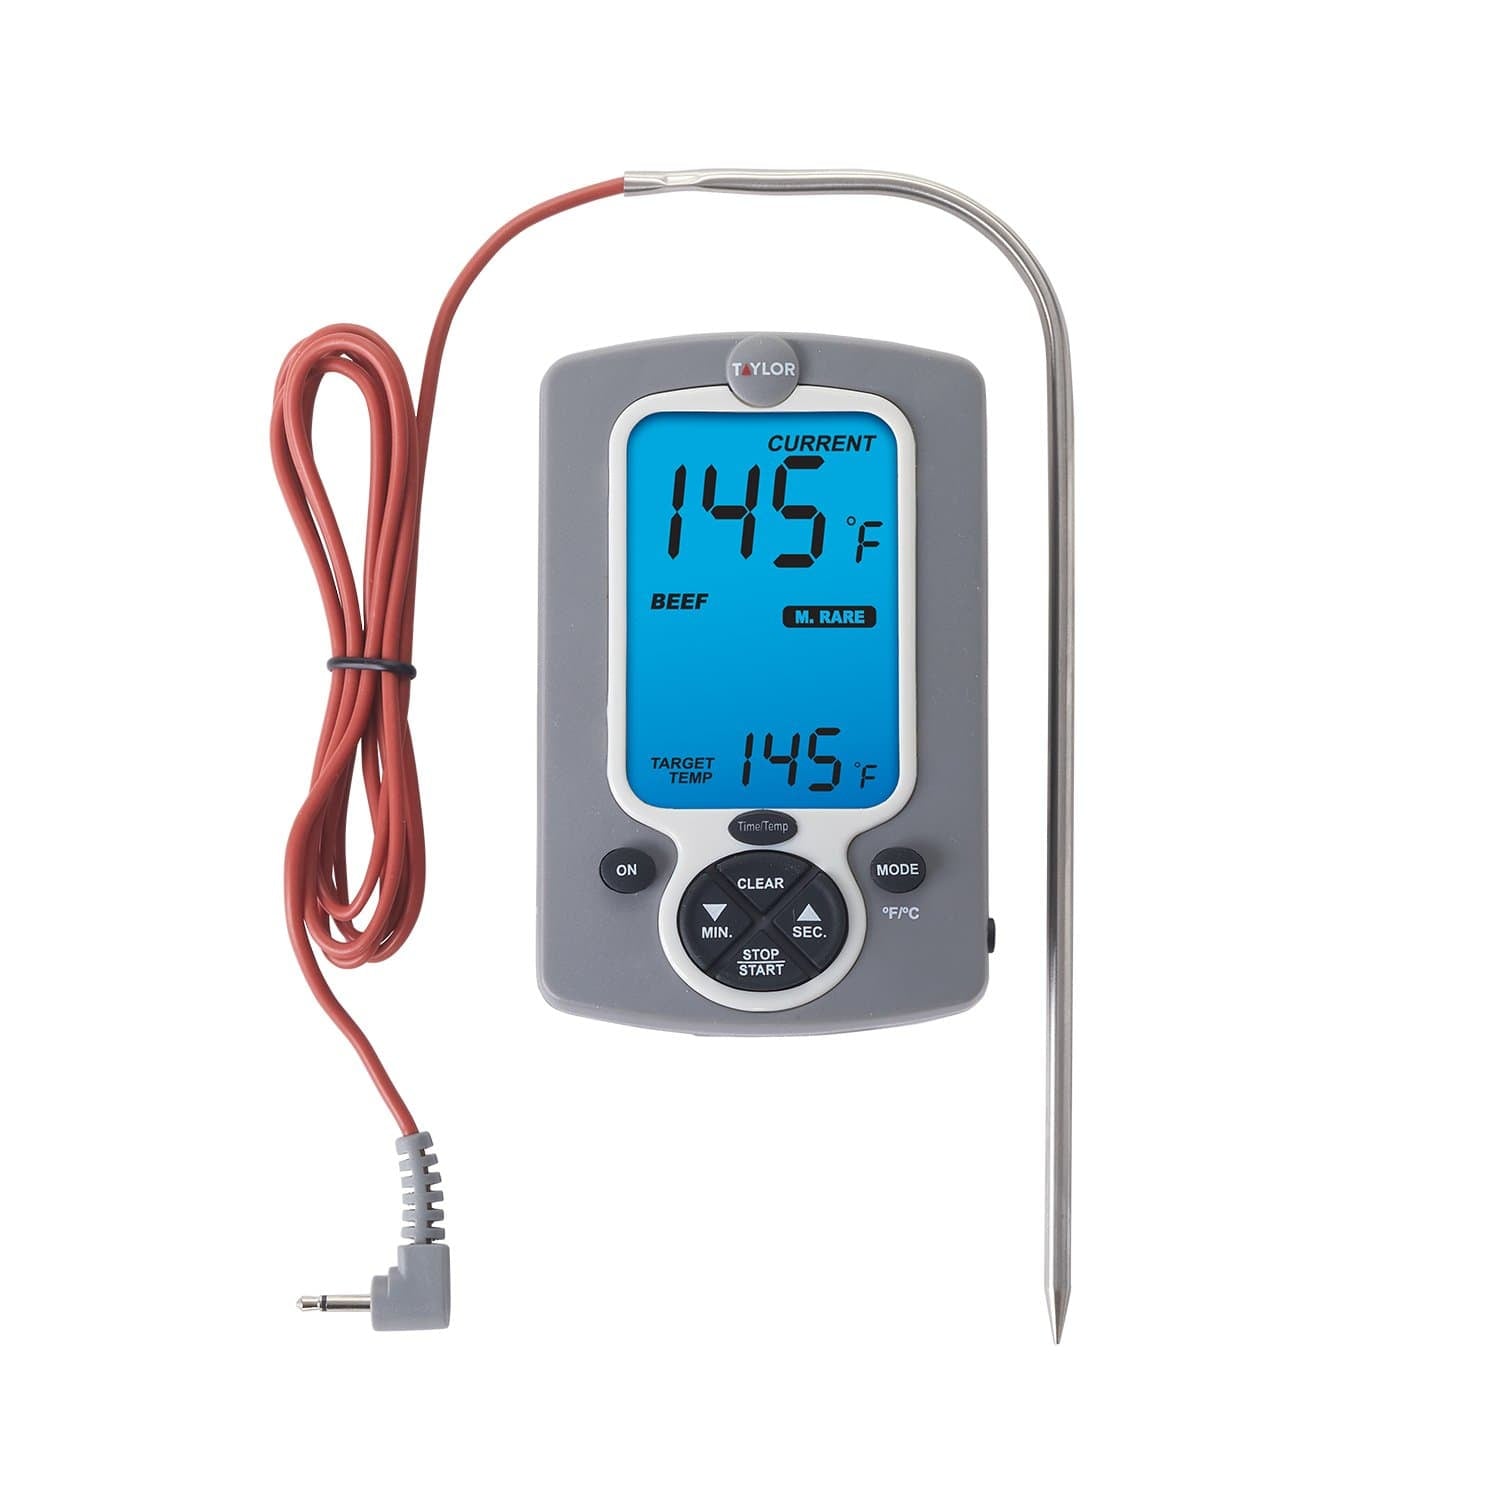 Taylor Digital Cooking Thermometer with Probe and Timer